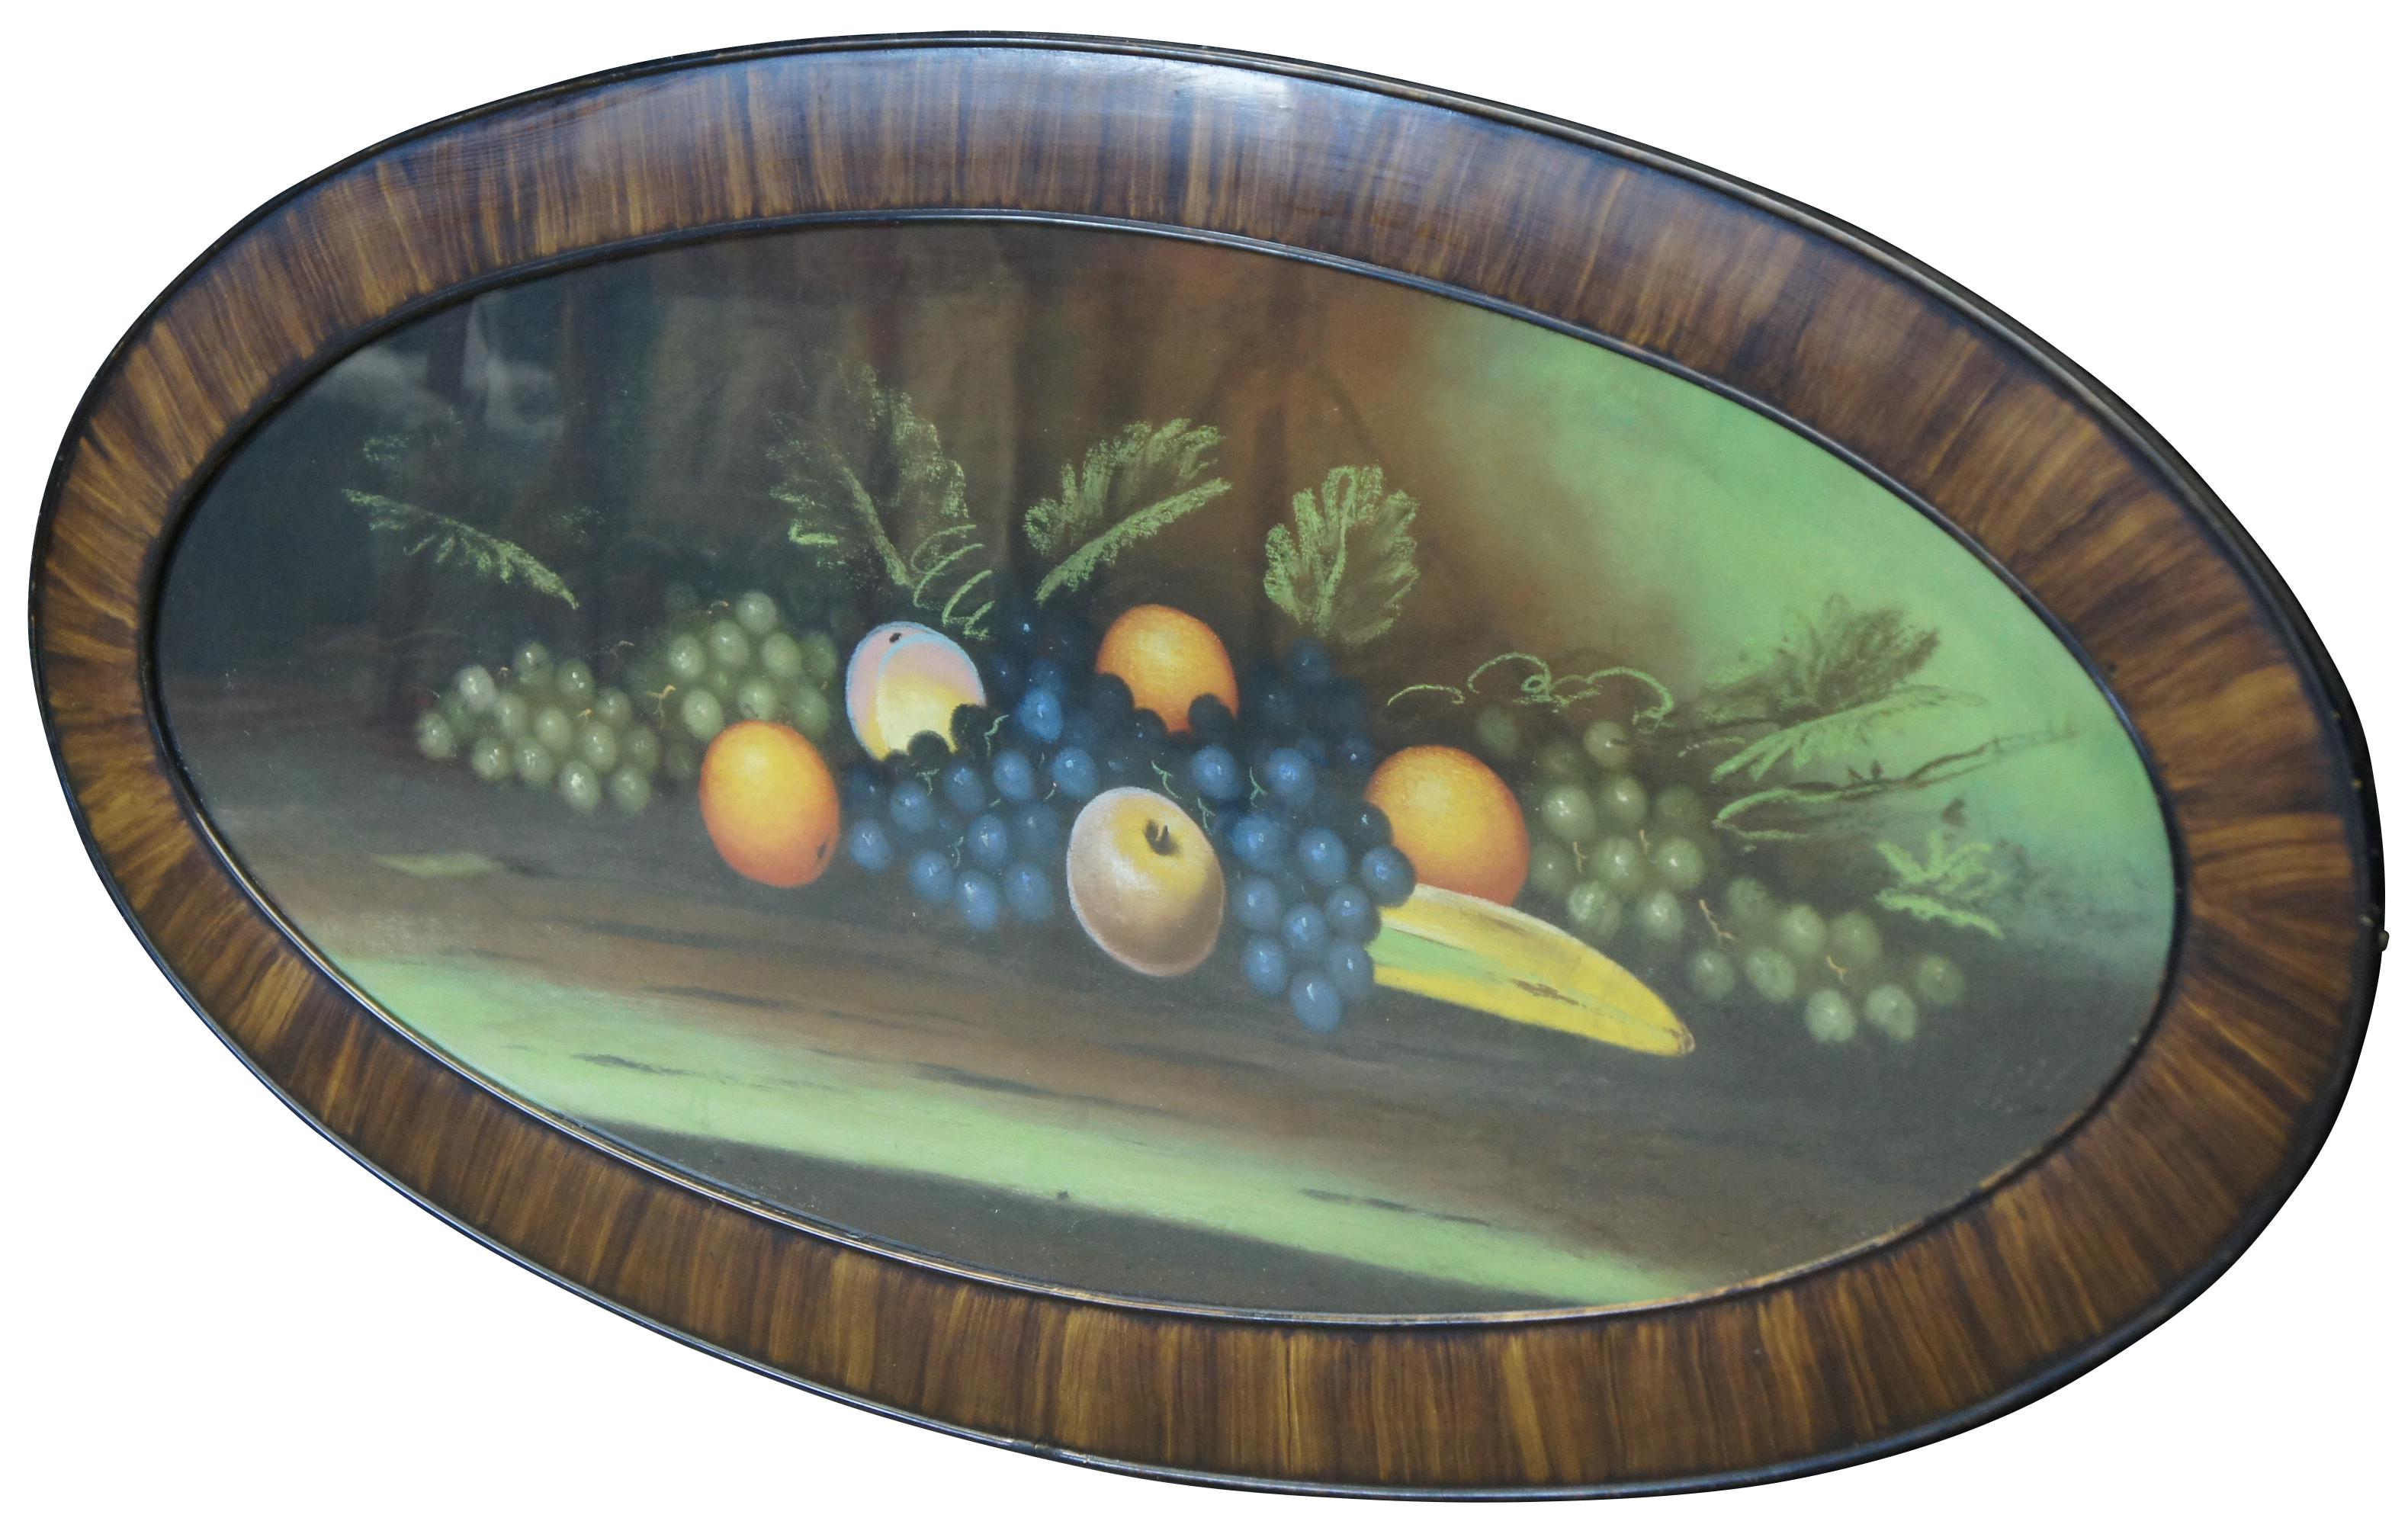 Large antique Victorian pastel painting showing a still life of a variety of fruit, in a faux wood grain oval frame.

Measures: 45.2” x 0.75” x 23.25” / Sans frame - 39.5” x 17.25” (width x depth x height).
   